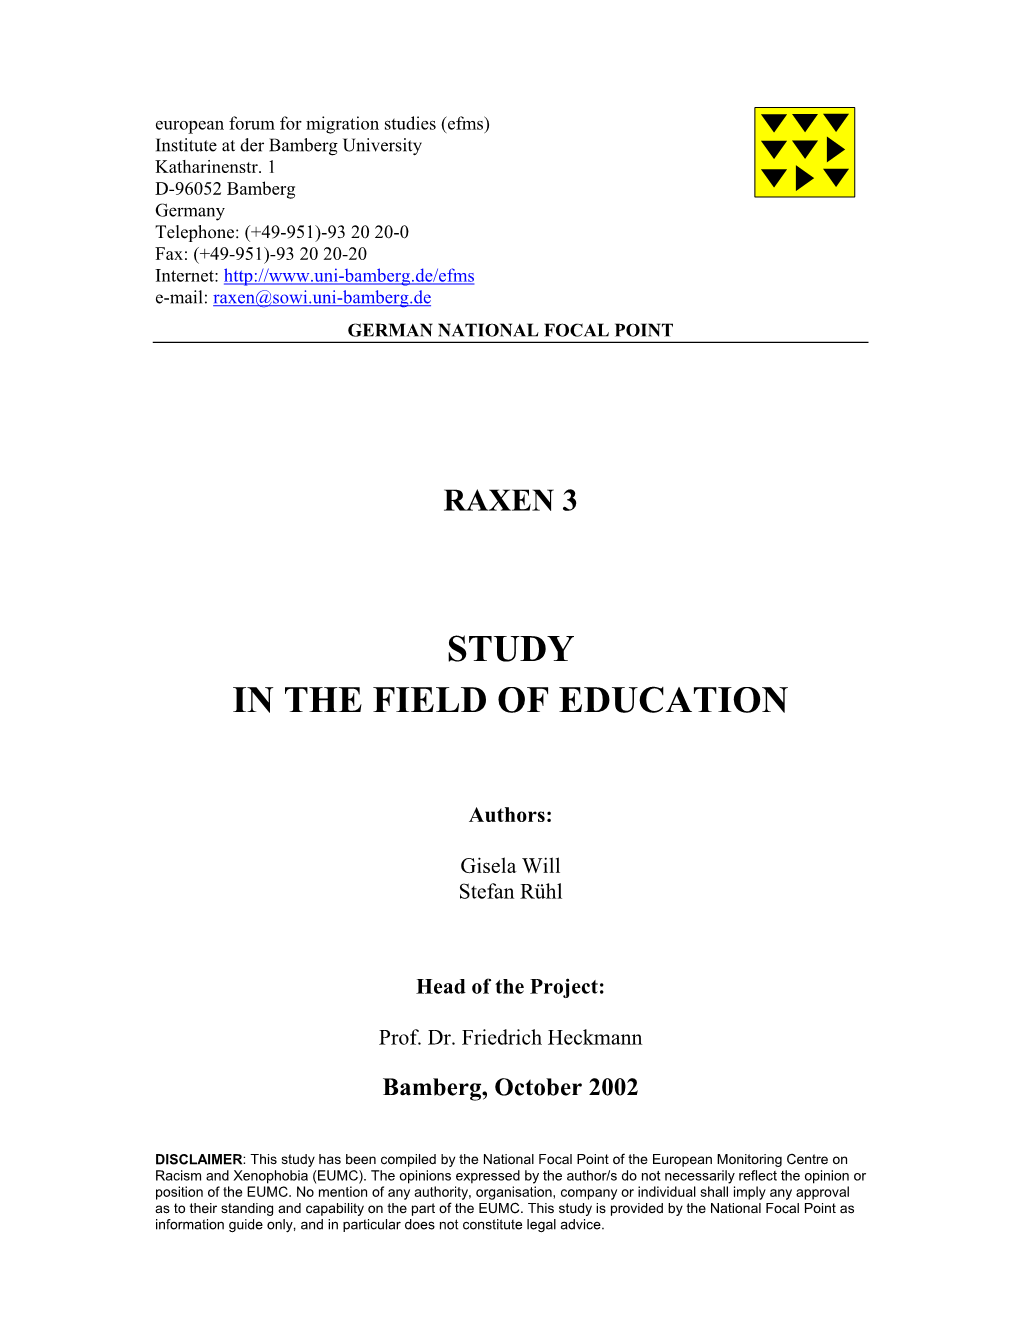 Study in the Field of Education